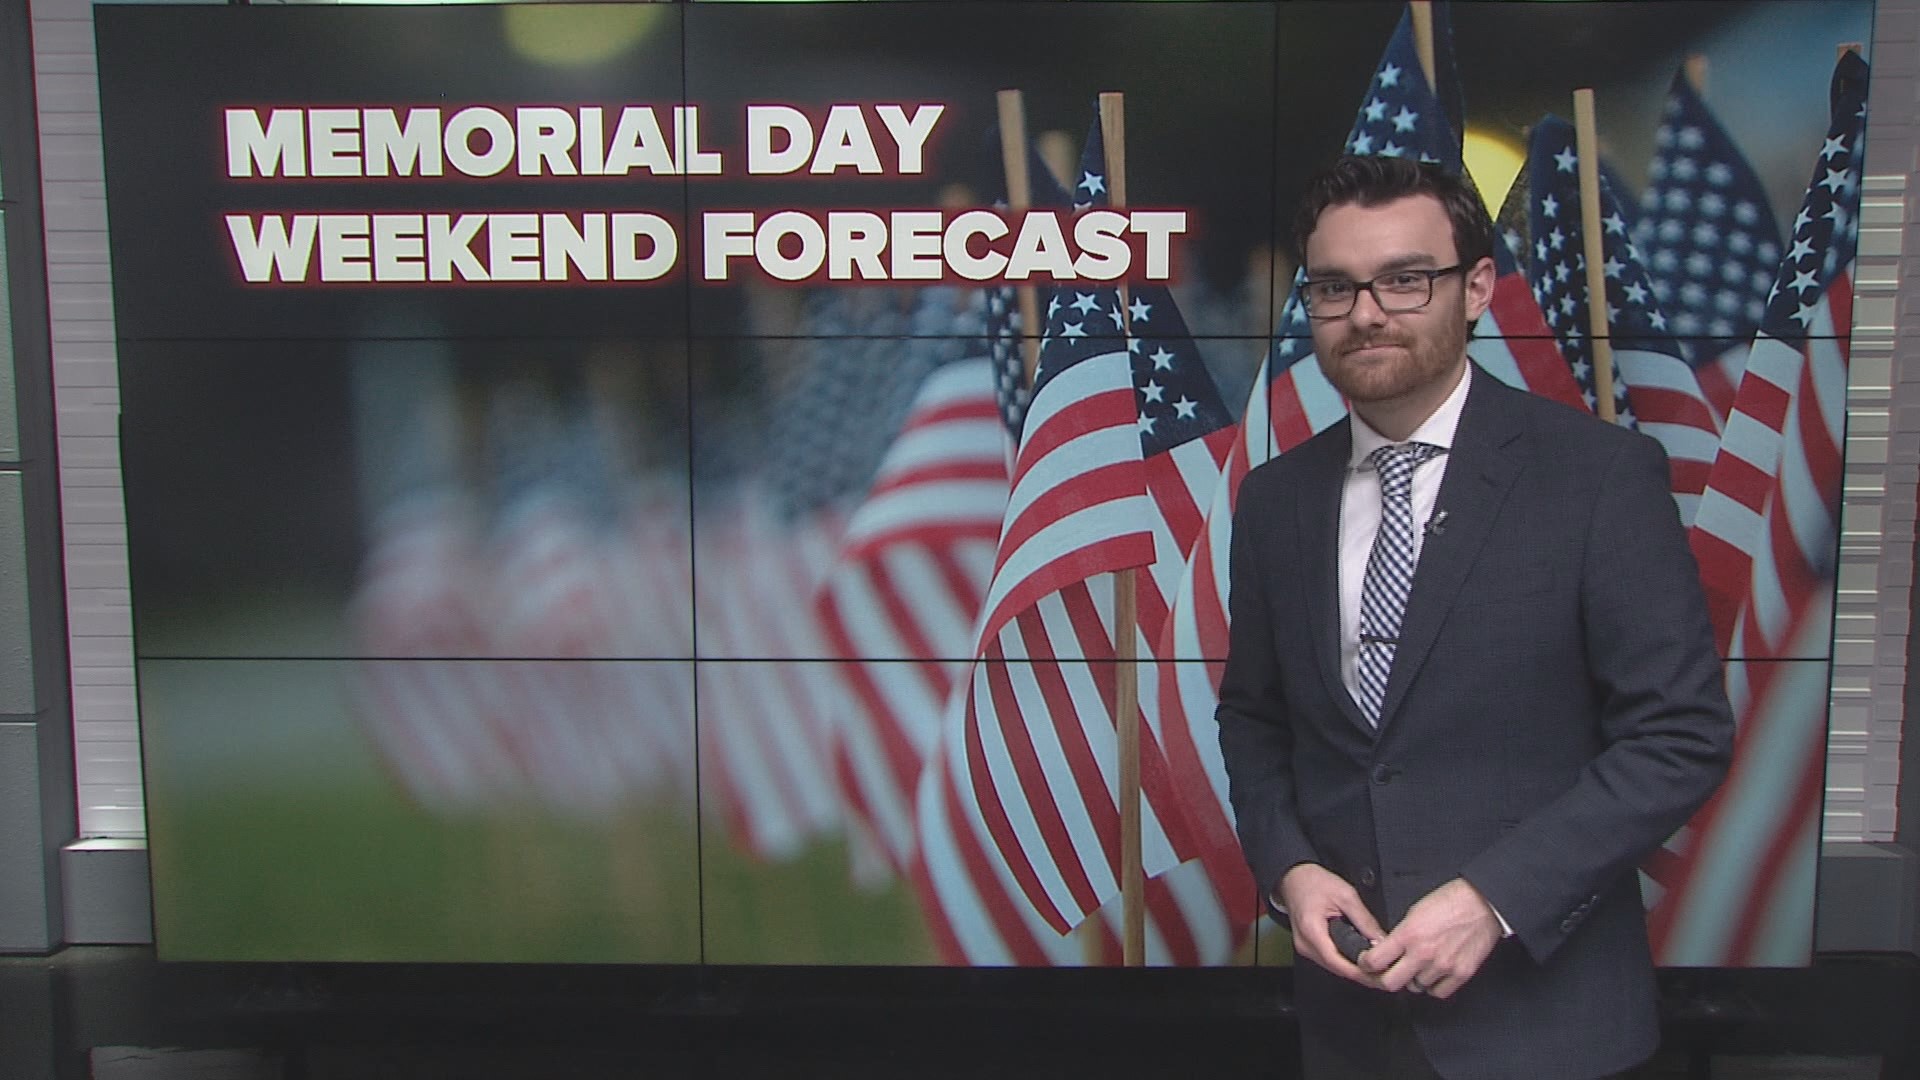 Cooler than average temps and Sierra thunderstorms. ABC10 meteorologist Brenden Mincheff takes a look at the long weekend forecast for Northern California.